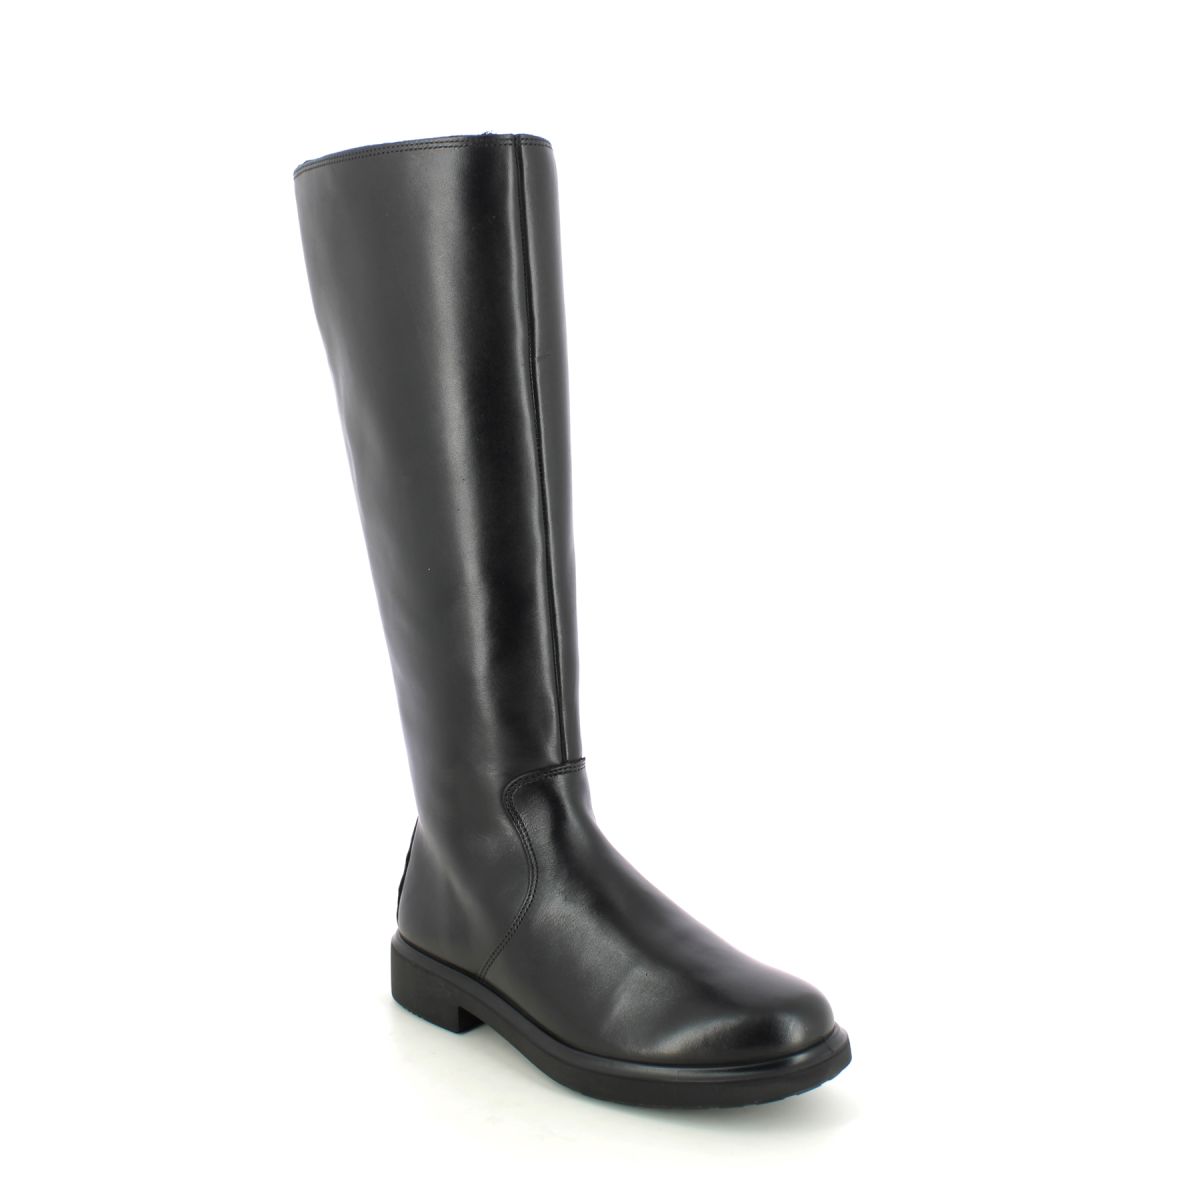 Ecco Amsterdam Metropole Tex Black Leather Womens Knee-High Boots 222023-01001 In Size 37 In Plain Black Leather